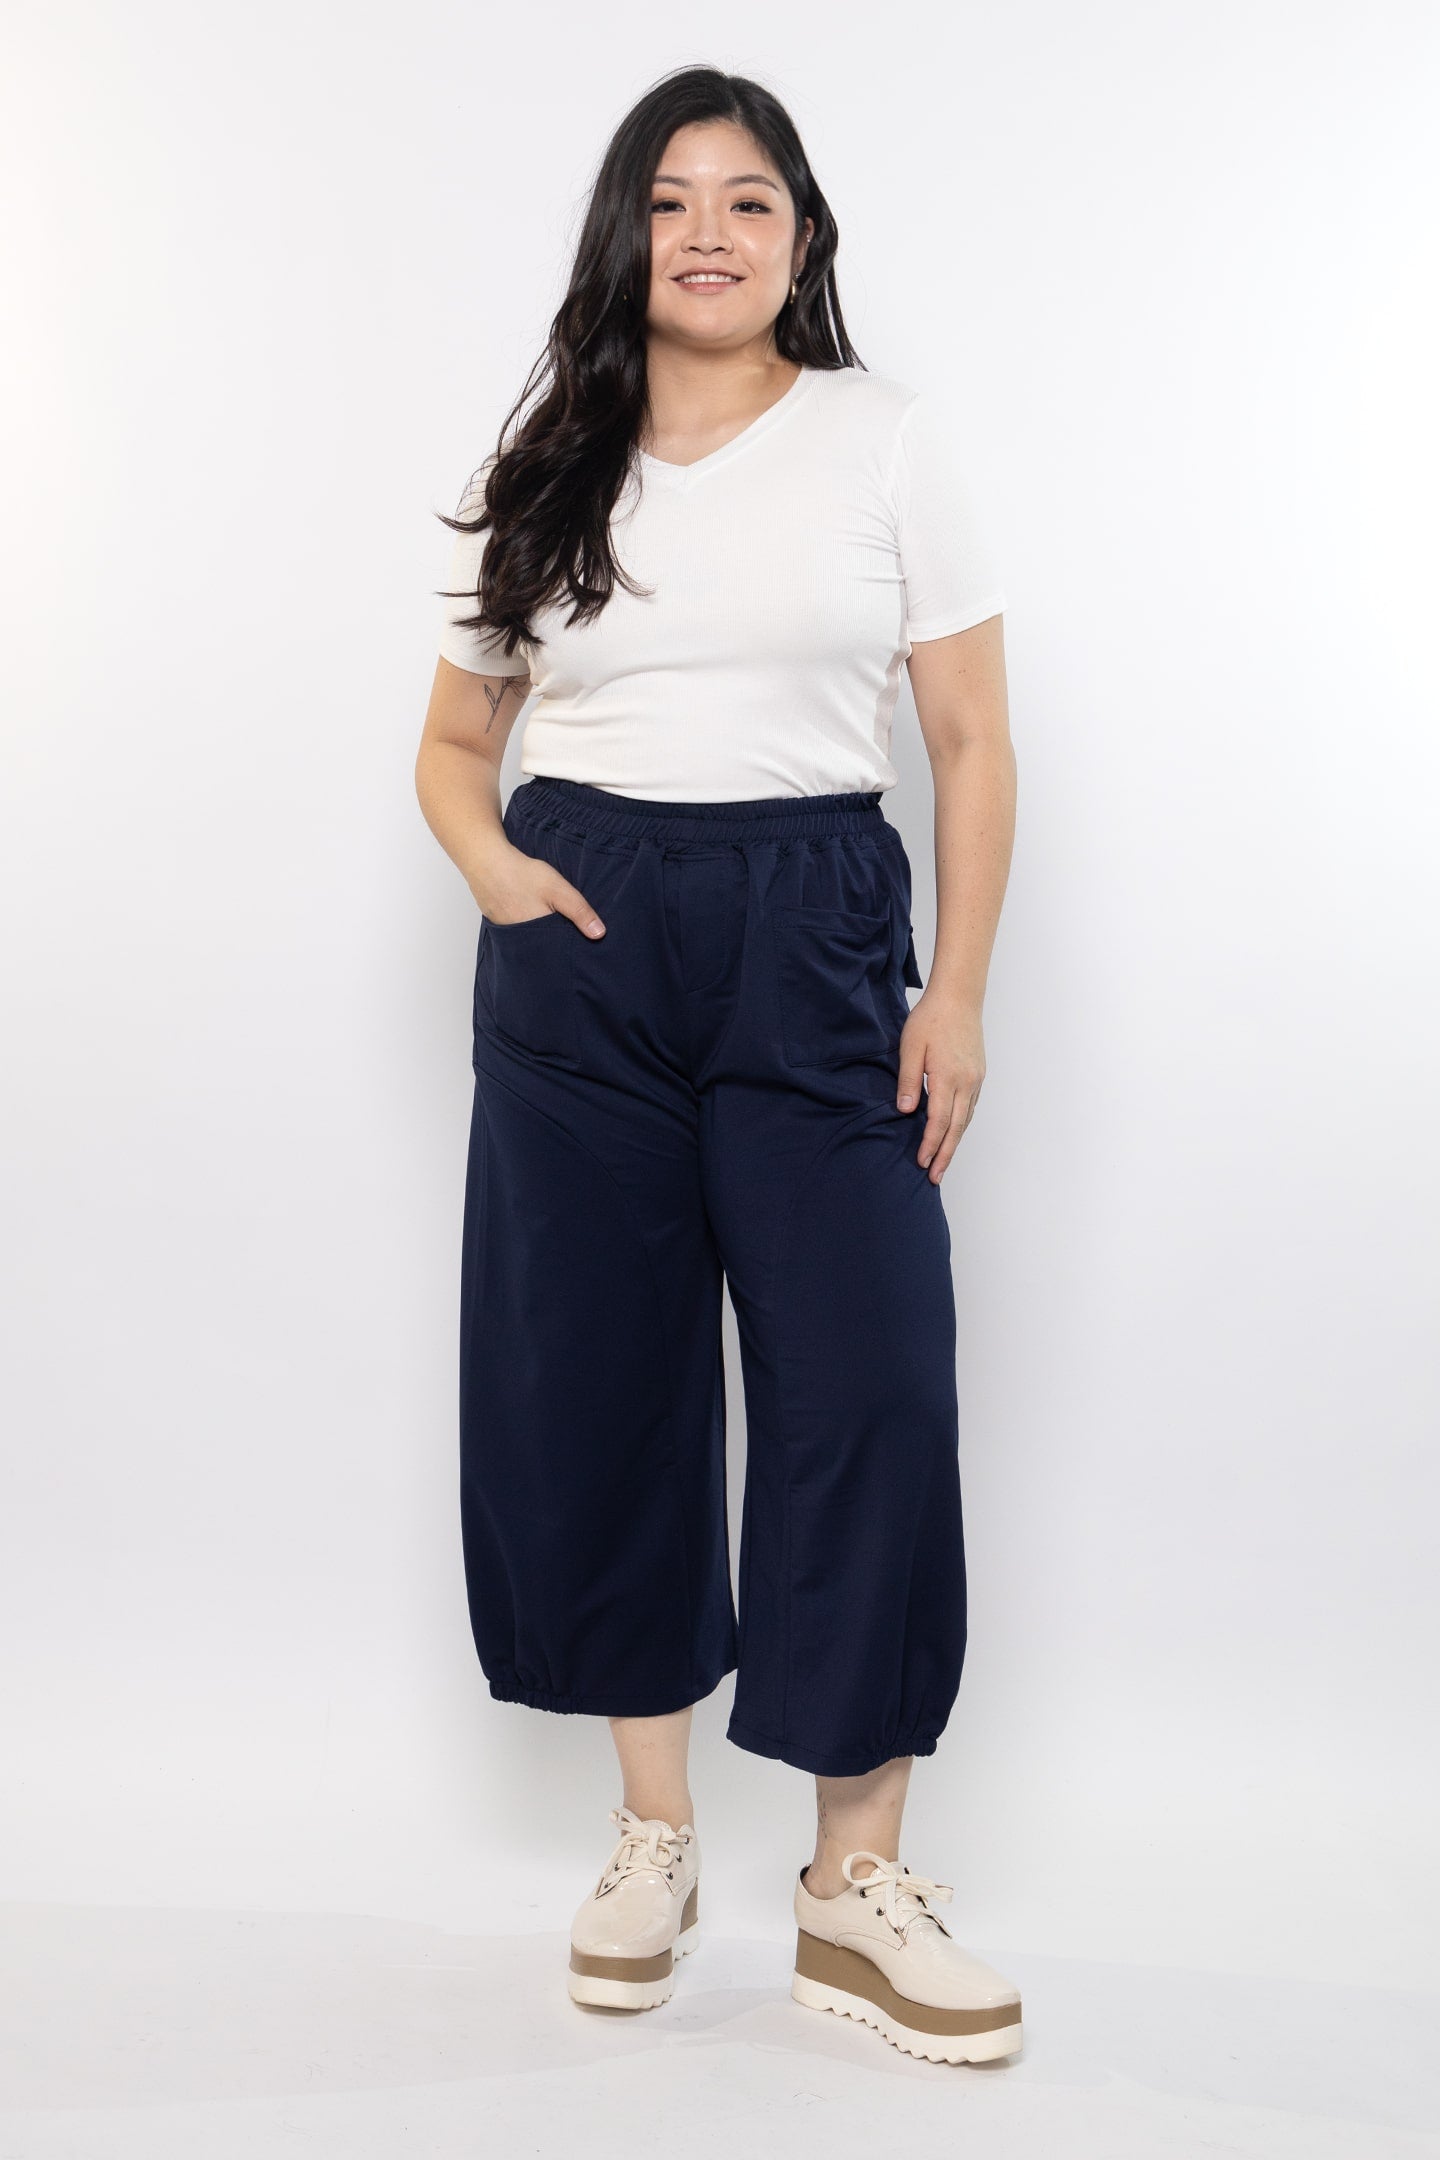 Bei Culottes in Navy Blue